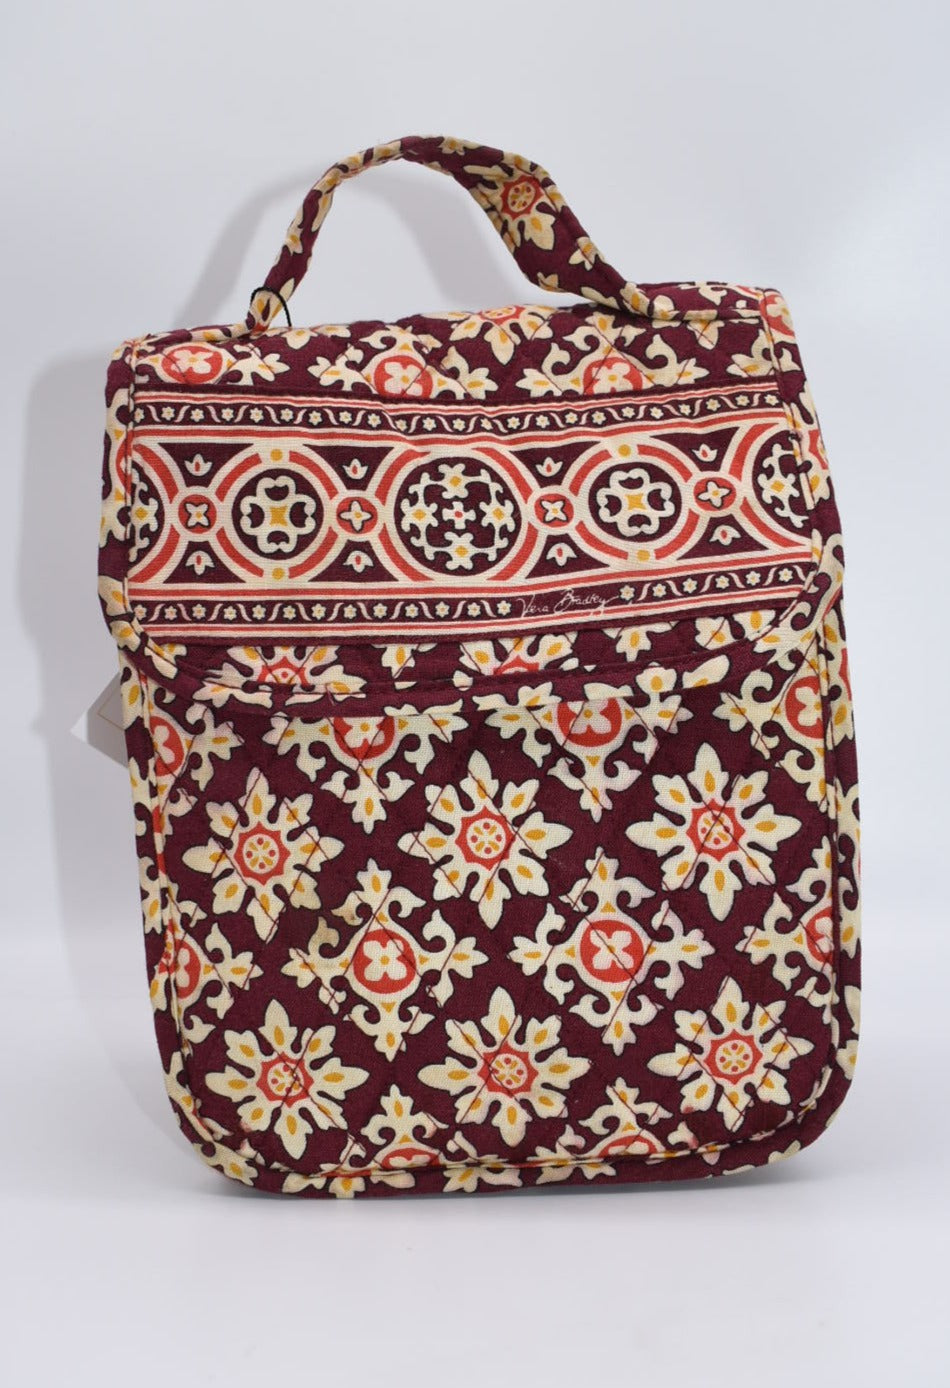 Vera Bradley "Out to Lunch" Bag in "Medallion -2006" Pattern